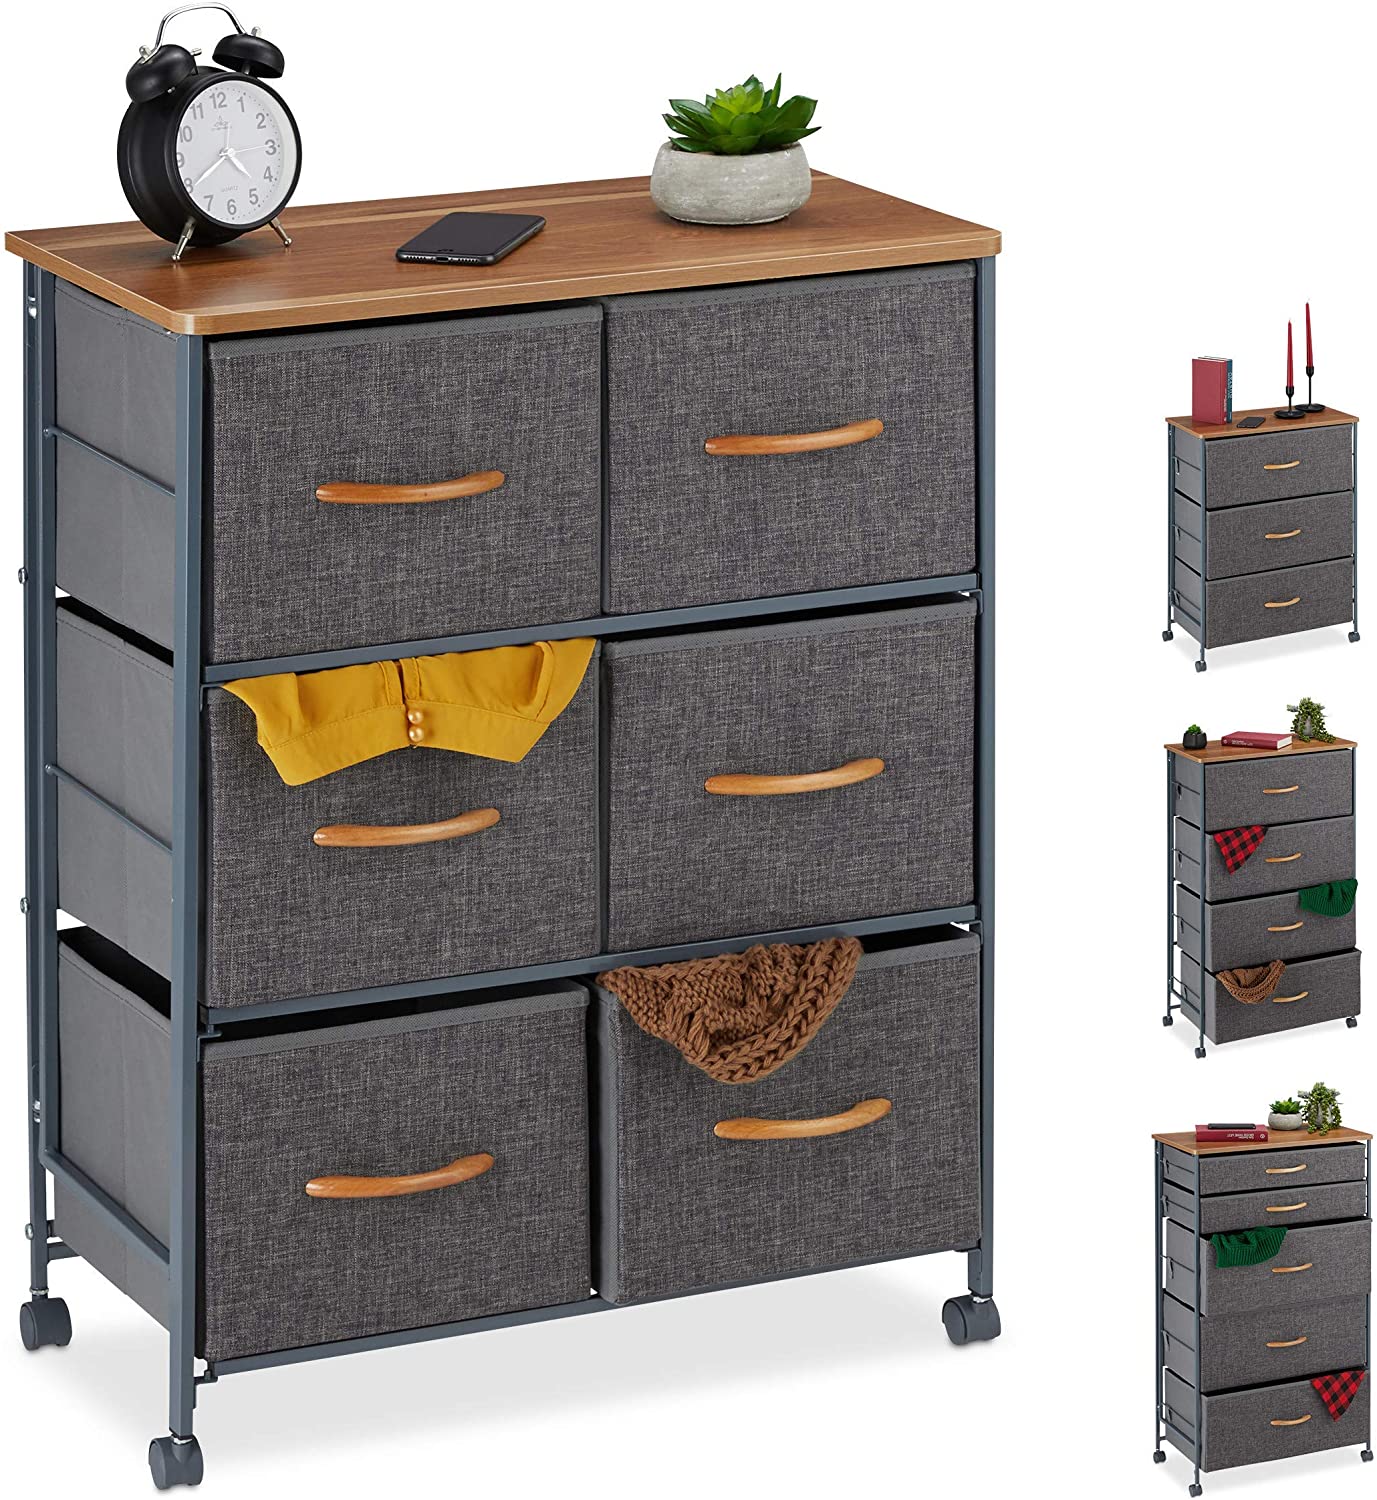 Relaxdays Drawer Cabinet With Wheels 6 Fabric Drawers Decorative Fabric Cab